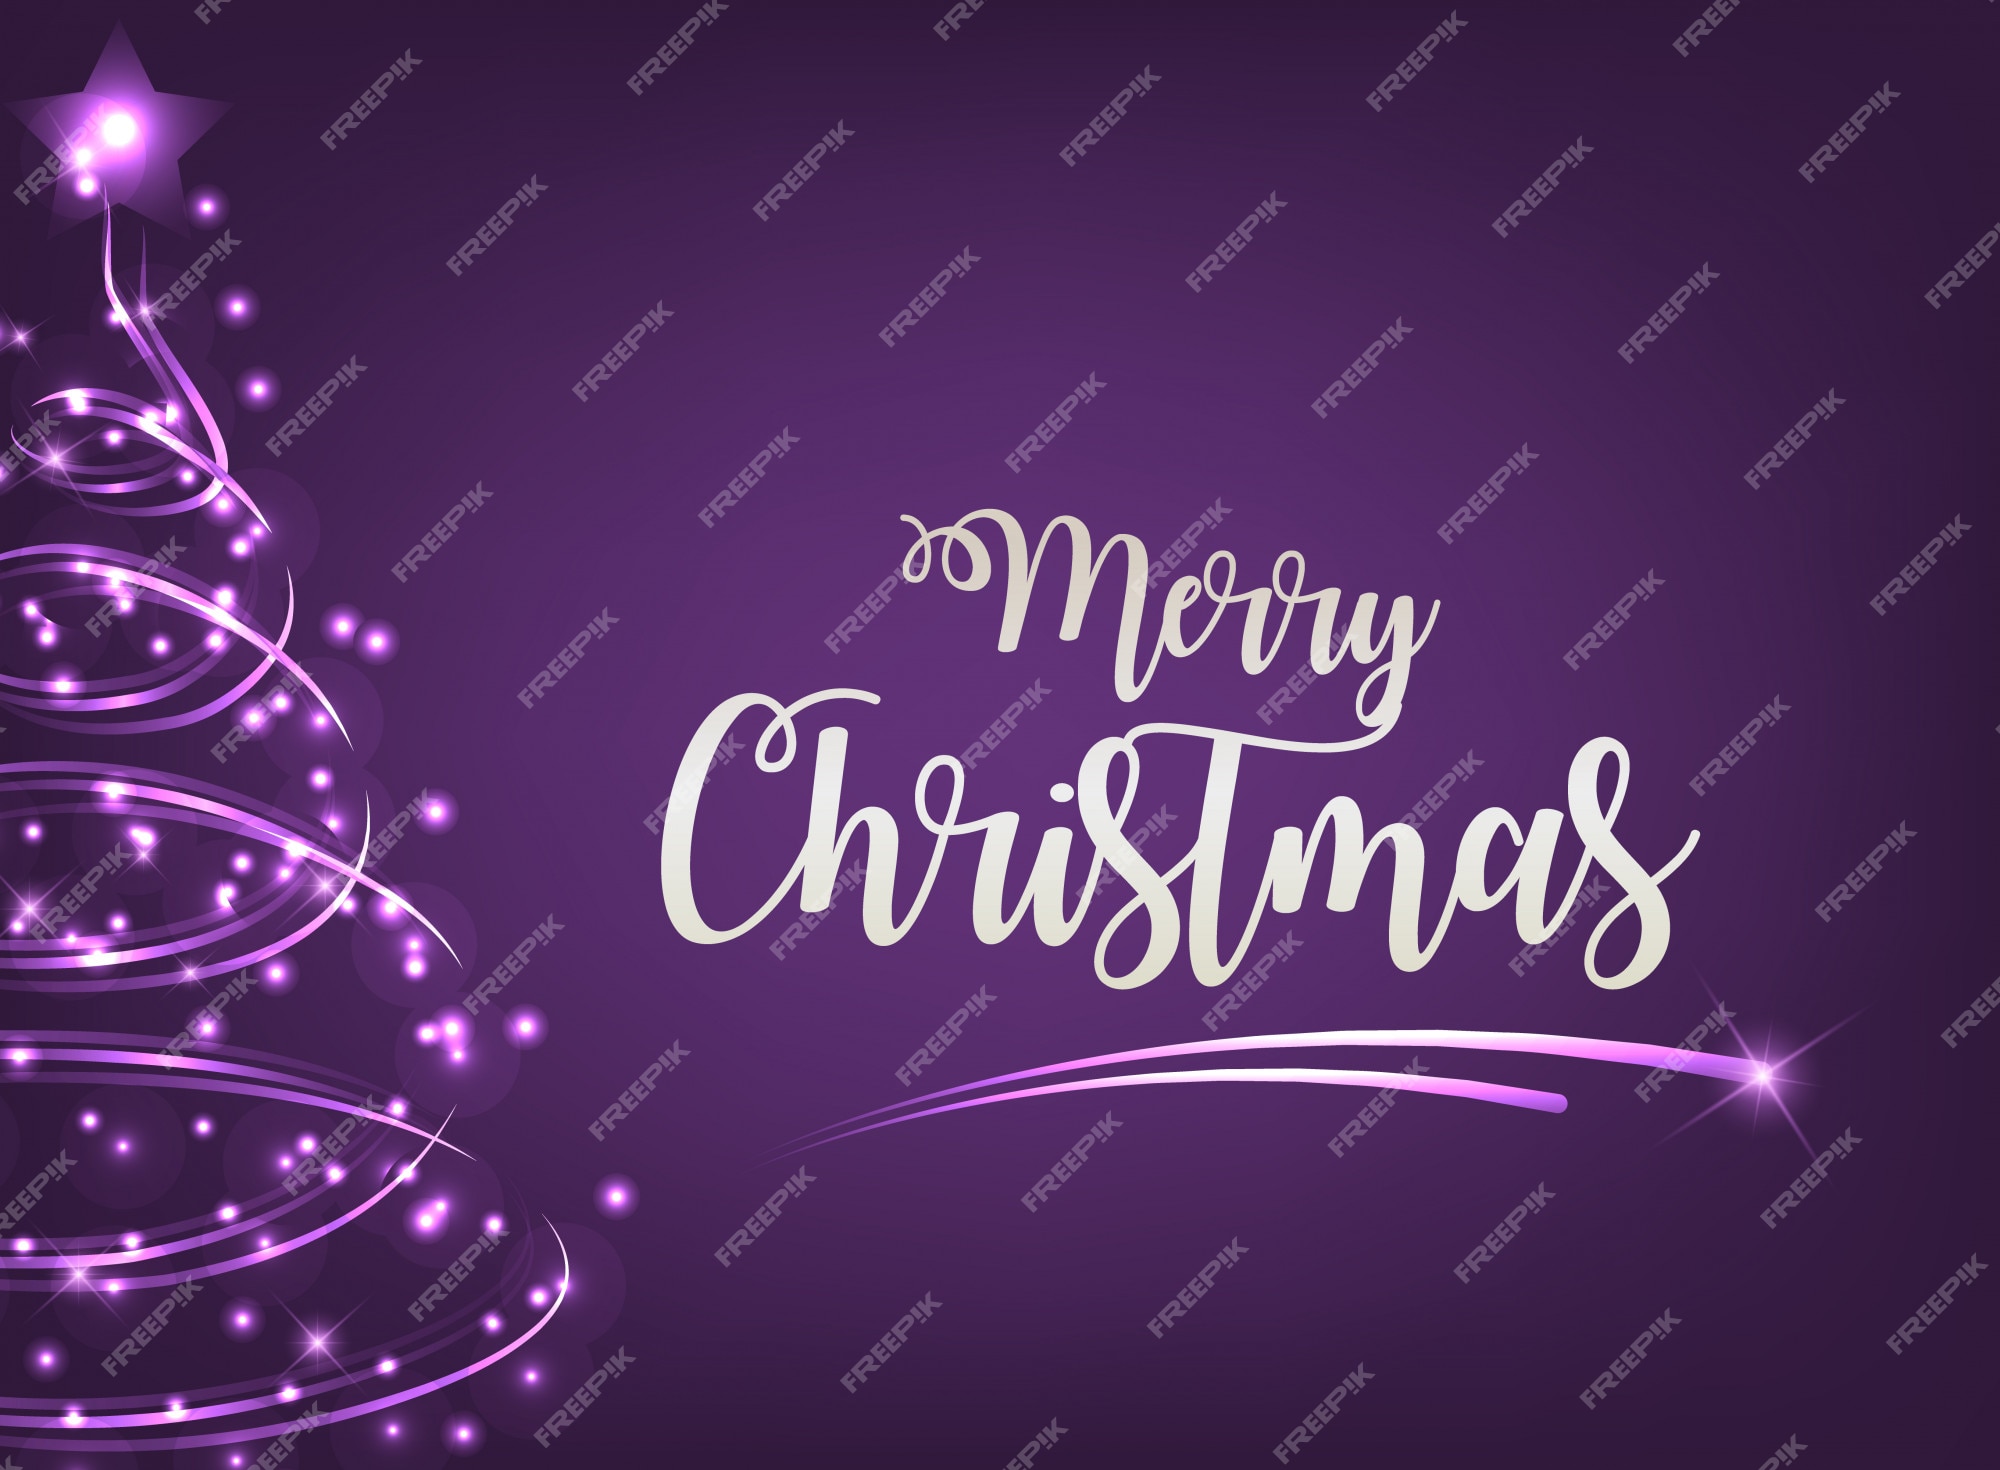 Premium Vector Merry christmas greeting with purple background and